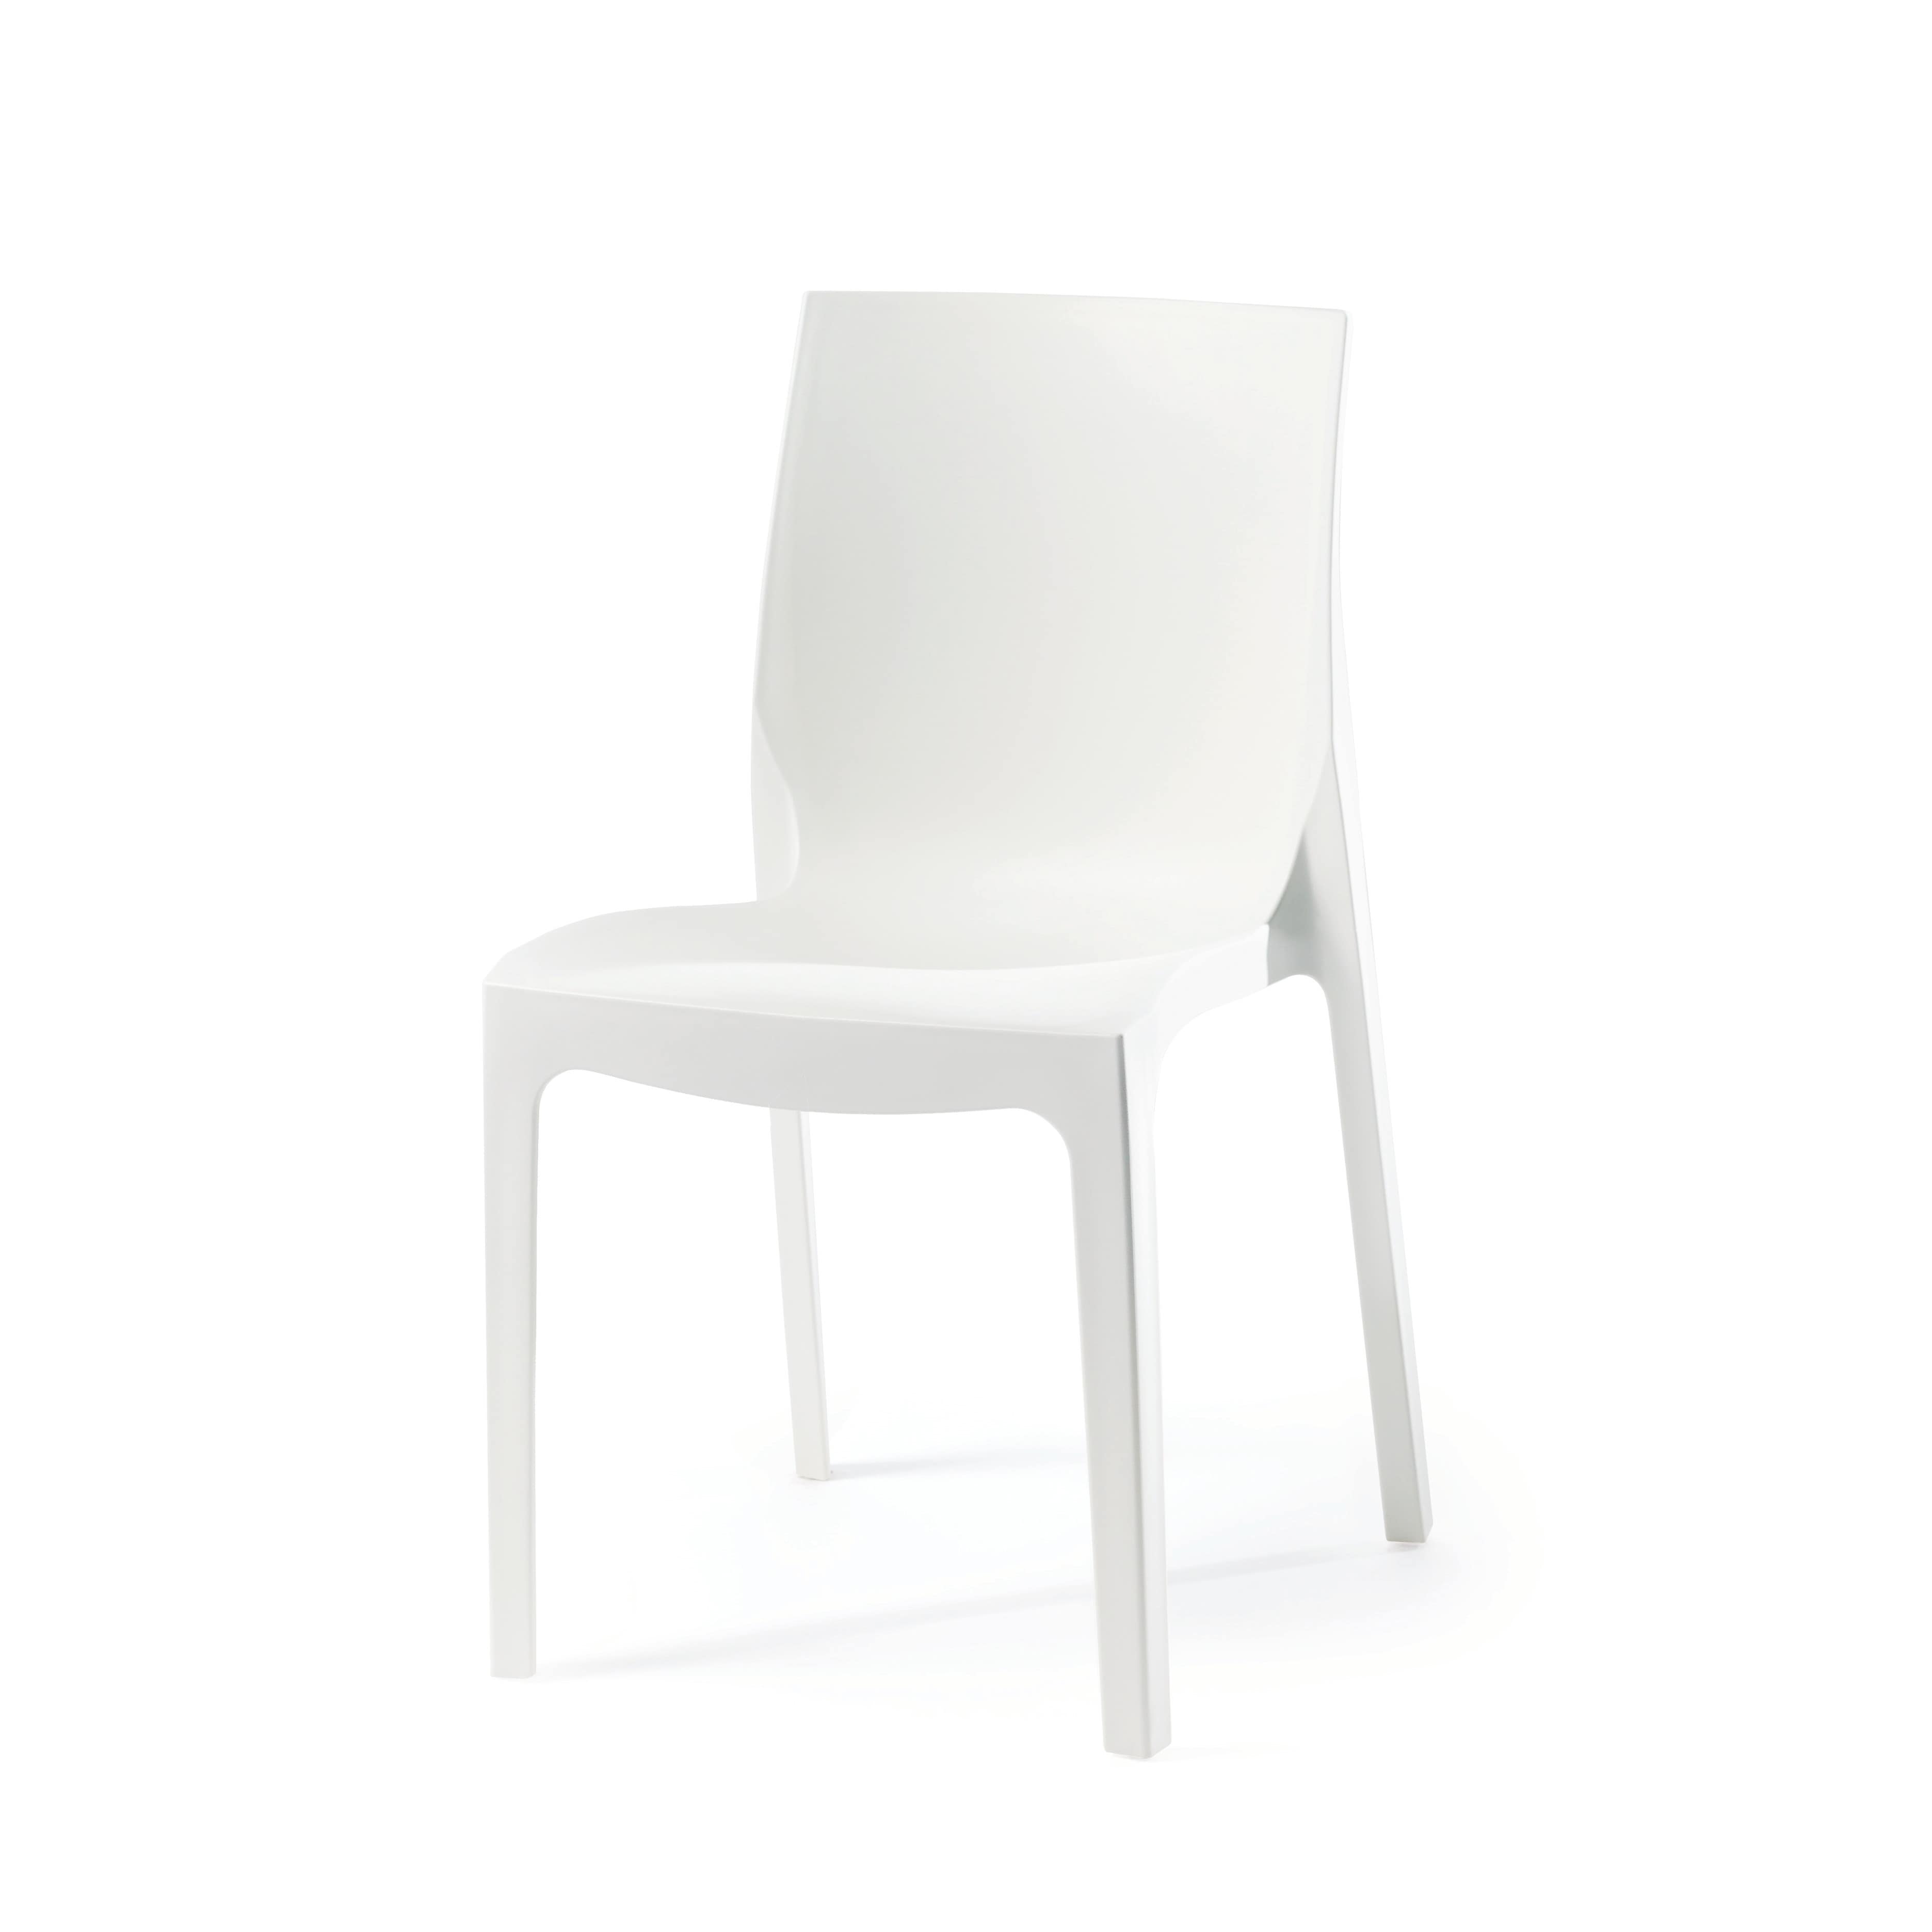 Chaise empilable EMMA / Blanche